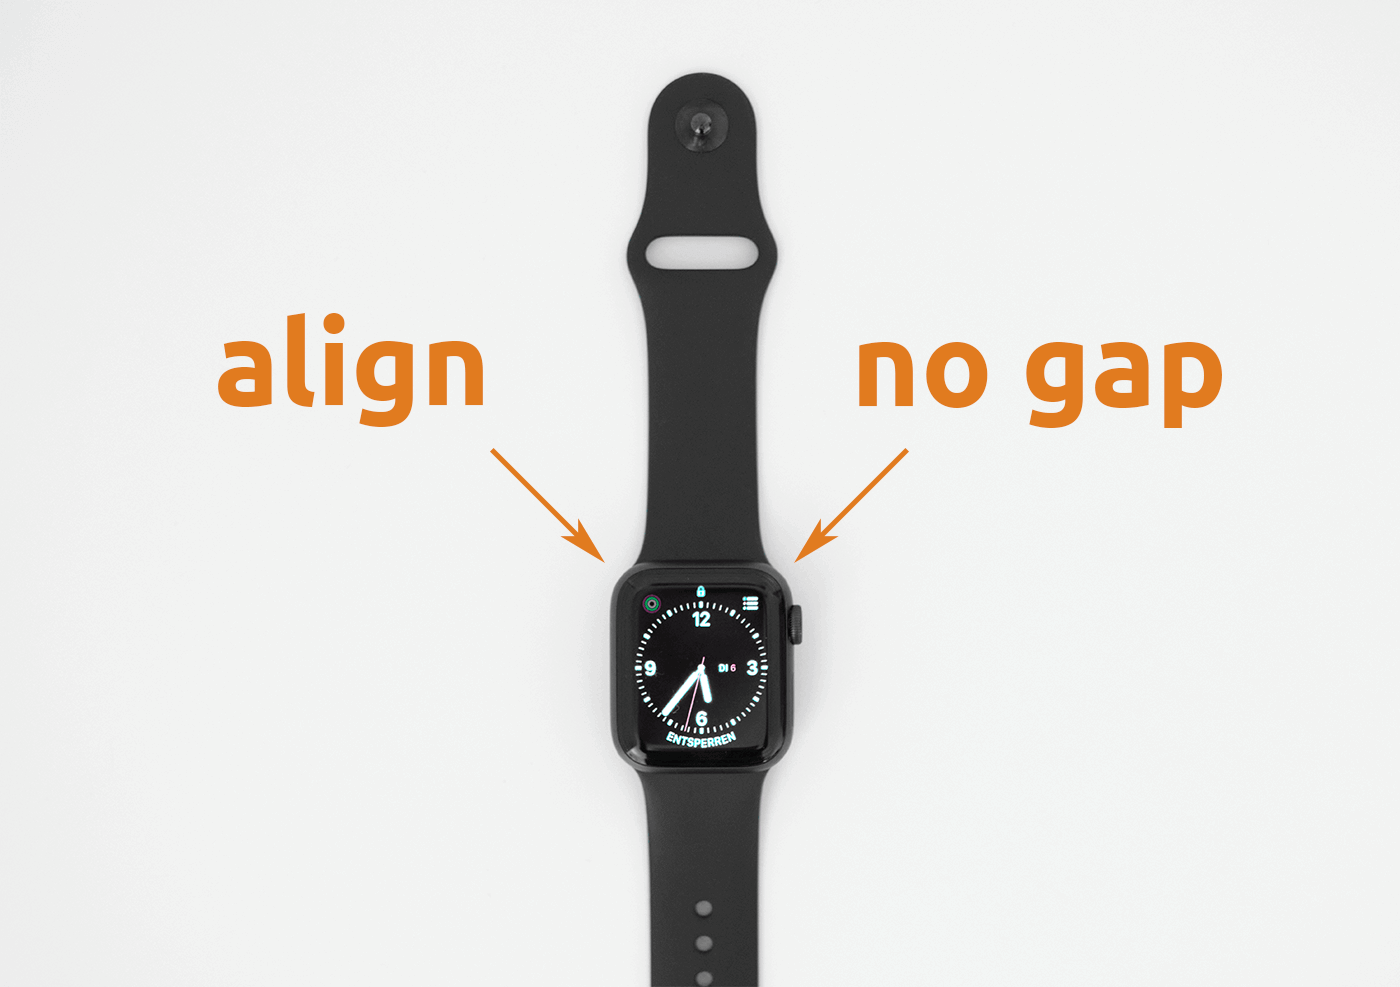 Force Band to Lock – Step 1: Align the Wrist Band